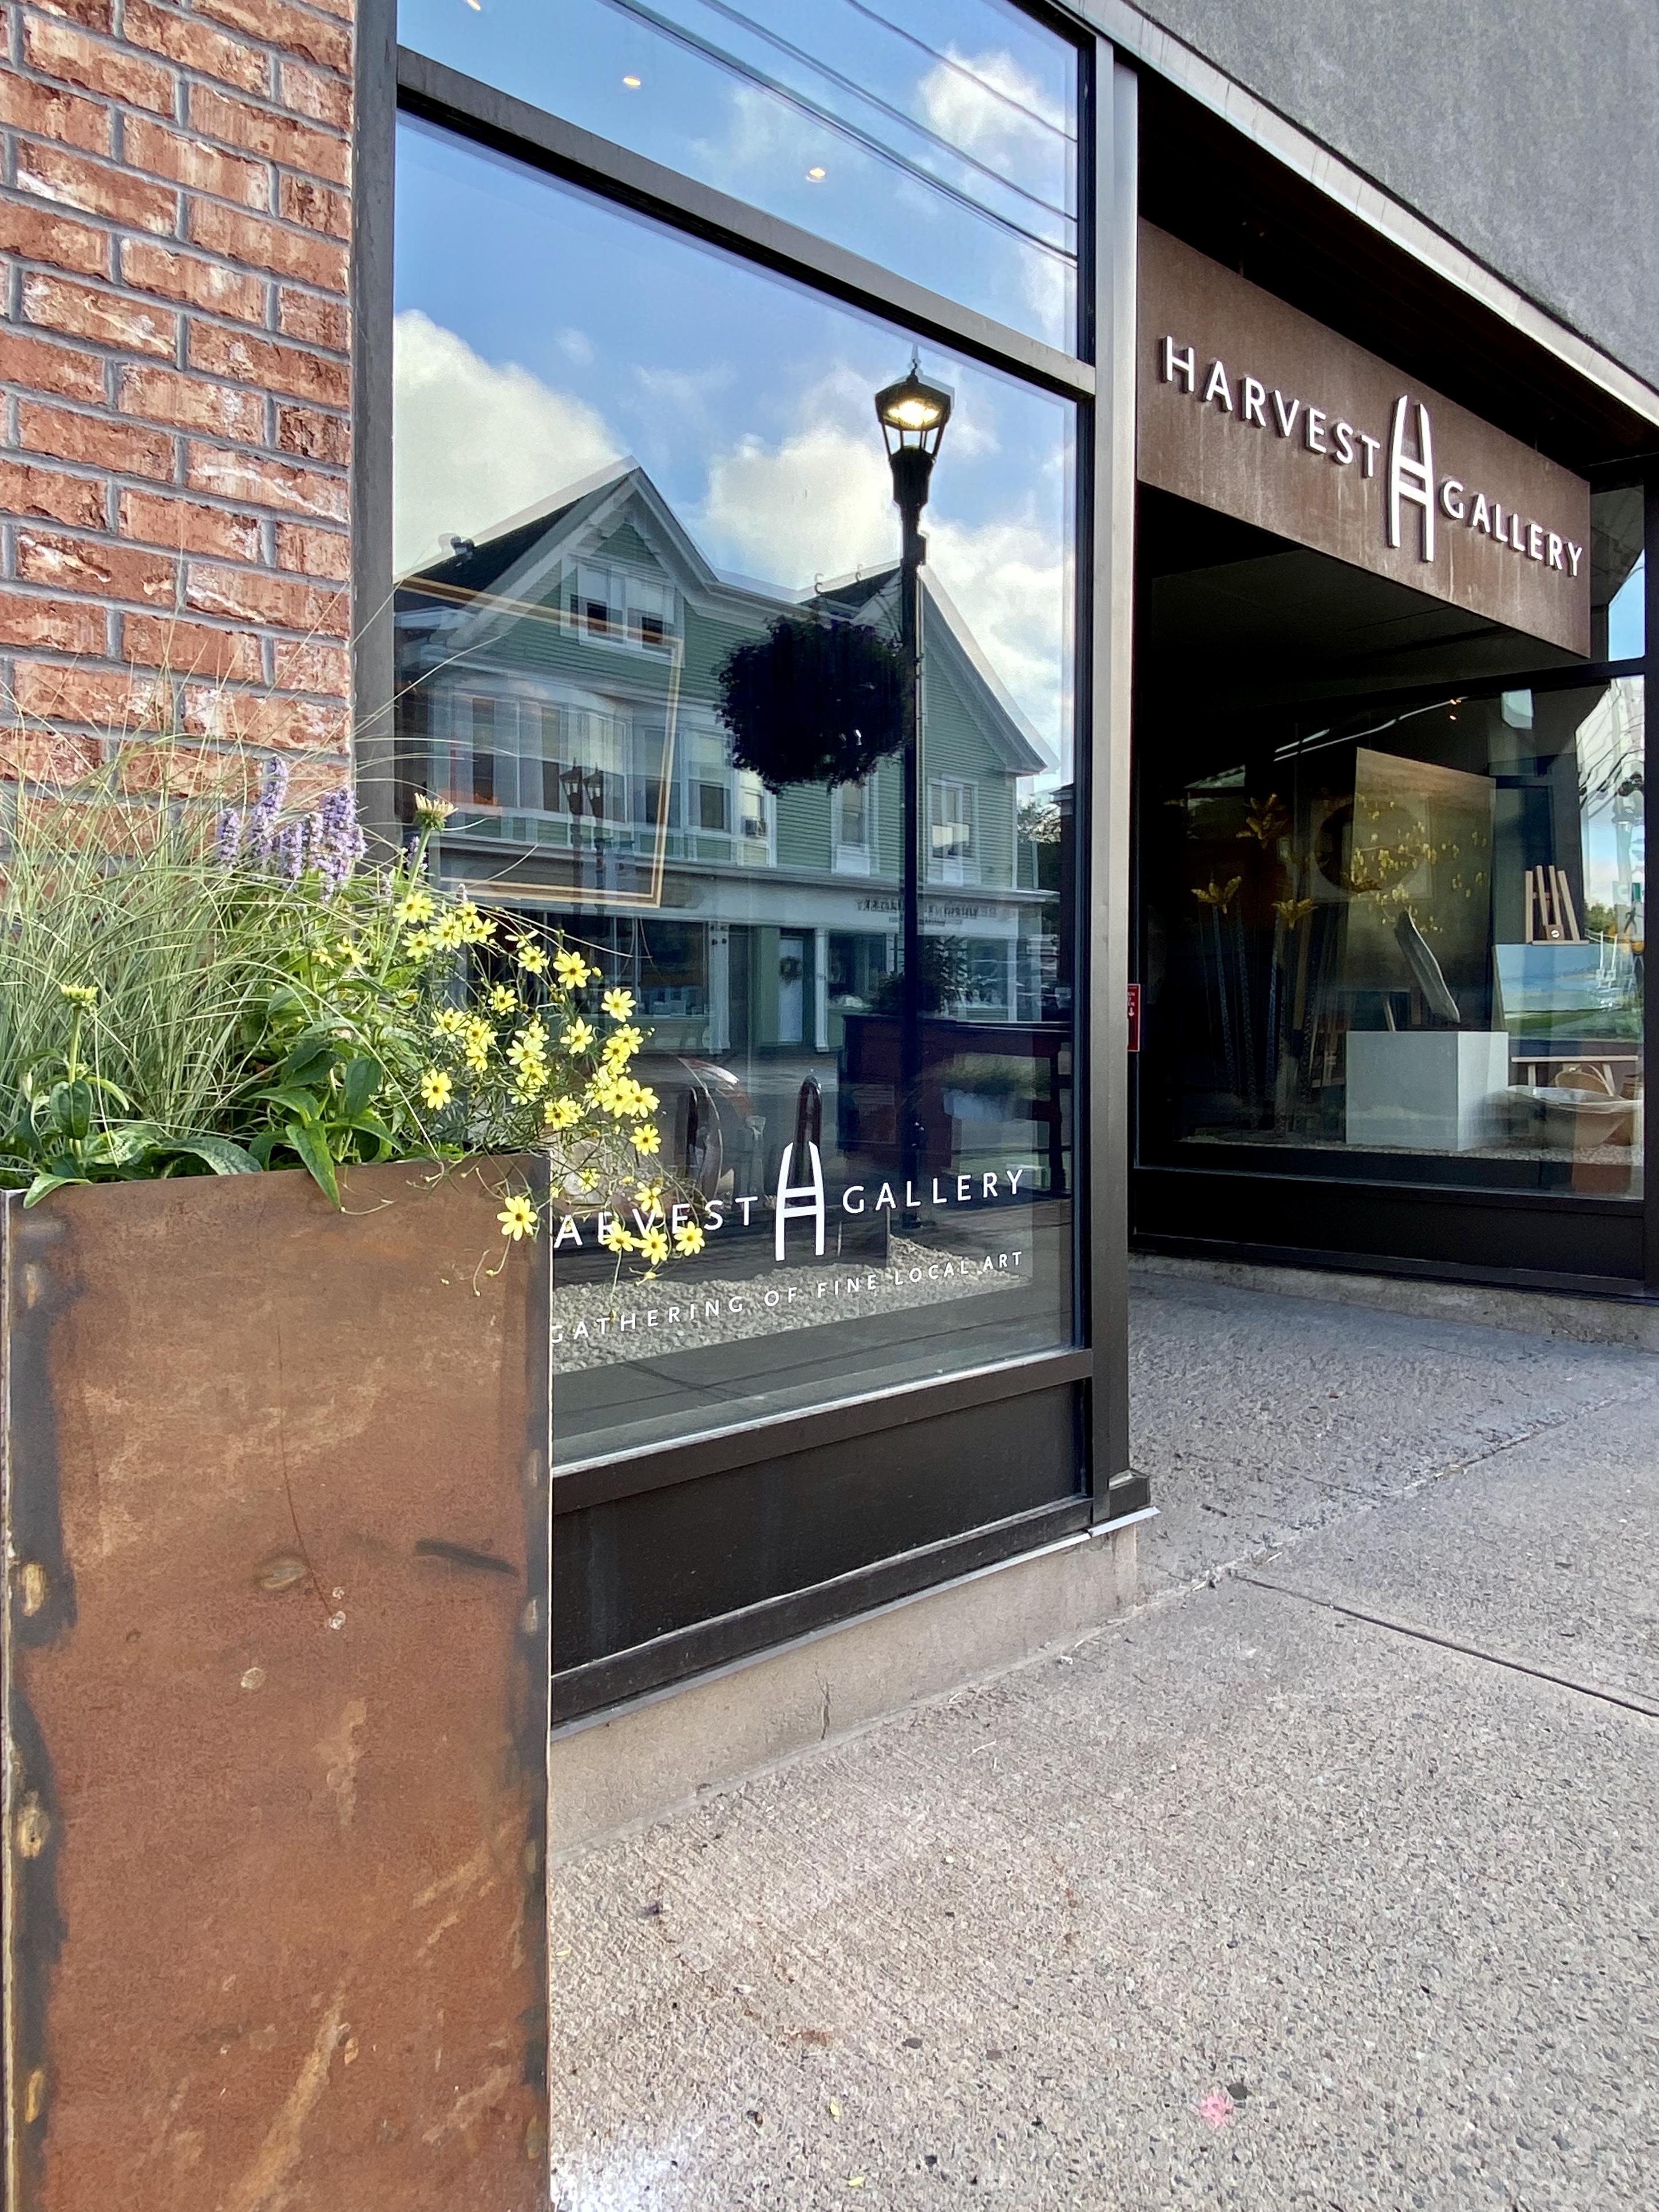 Exterior of Harvest Gallery